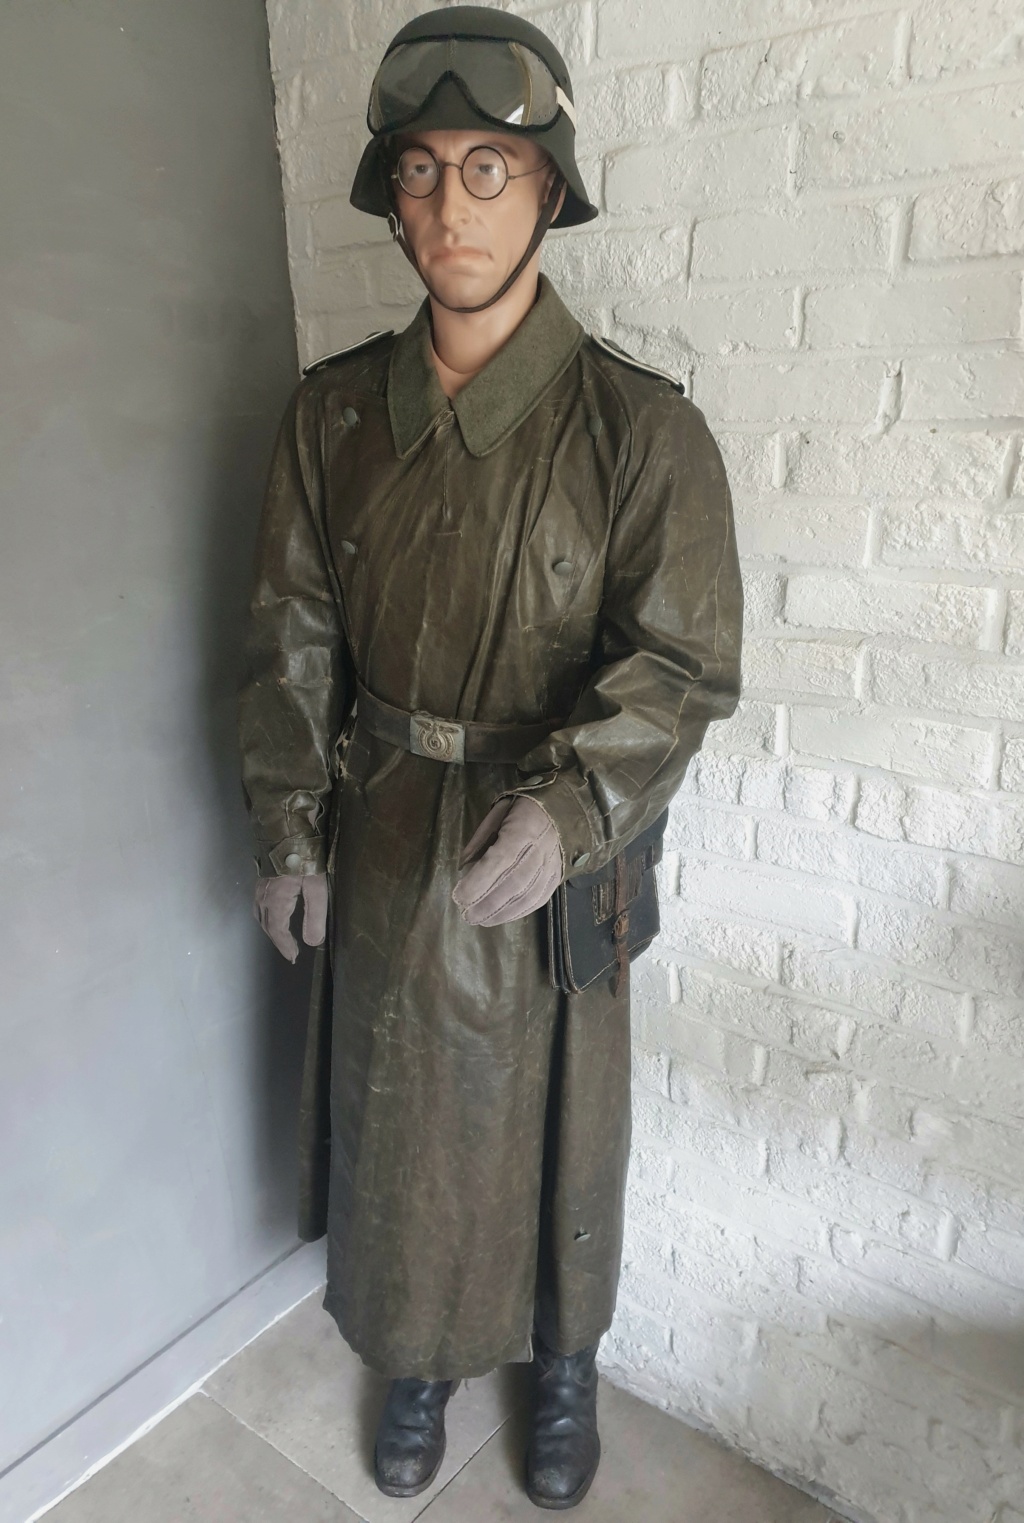 Authentification chemise wehrmacht 20240212